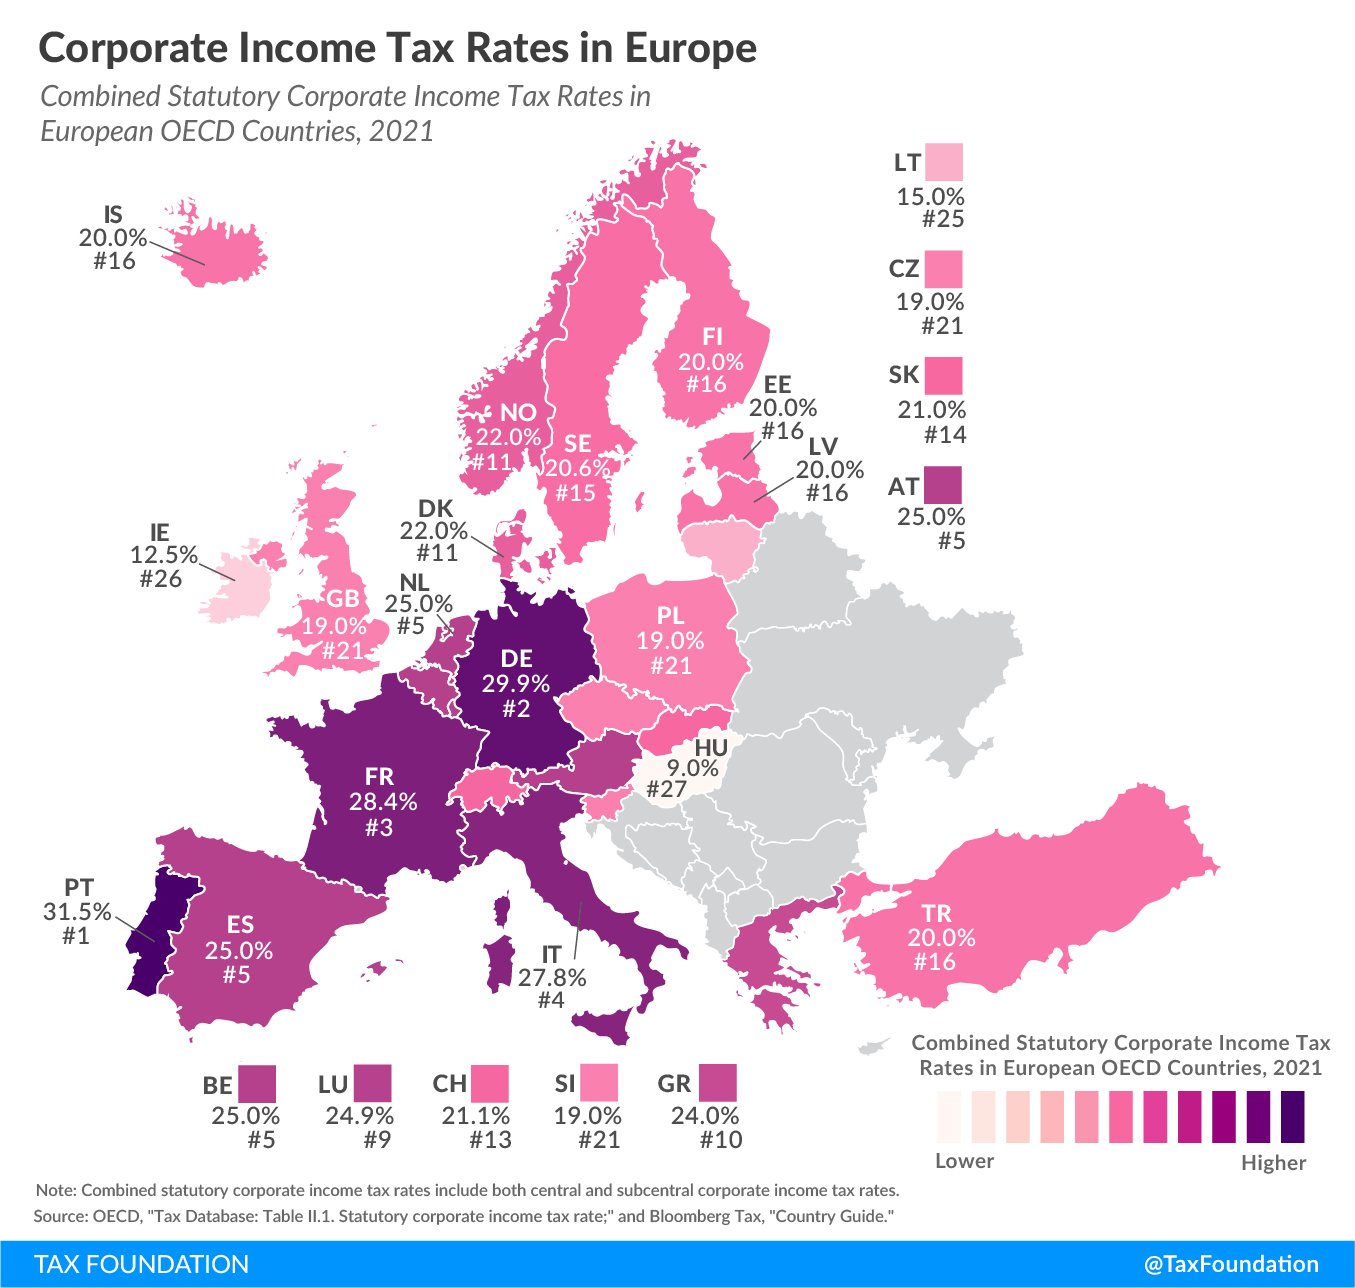 Corporate Income Tax Rates in Europe 2021 corporate taxes in Europe 2021 corproate tax rates in Europe corporate tax Europe